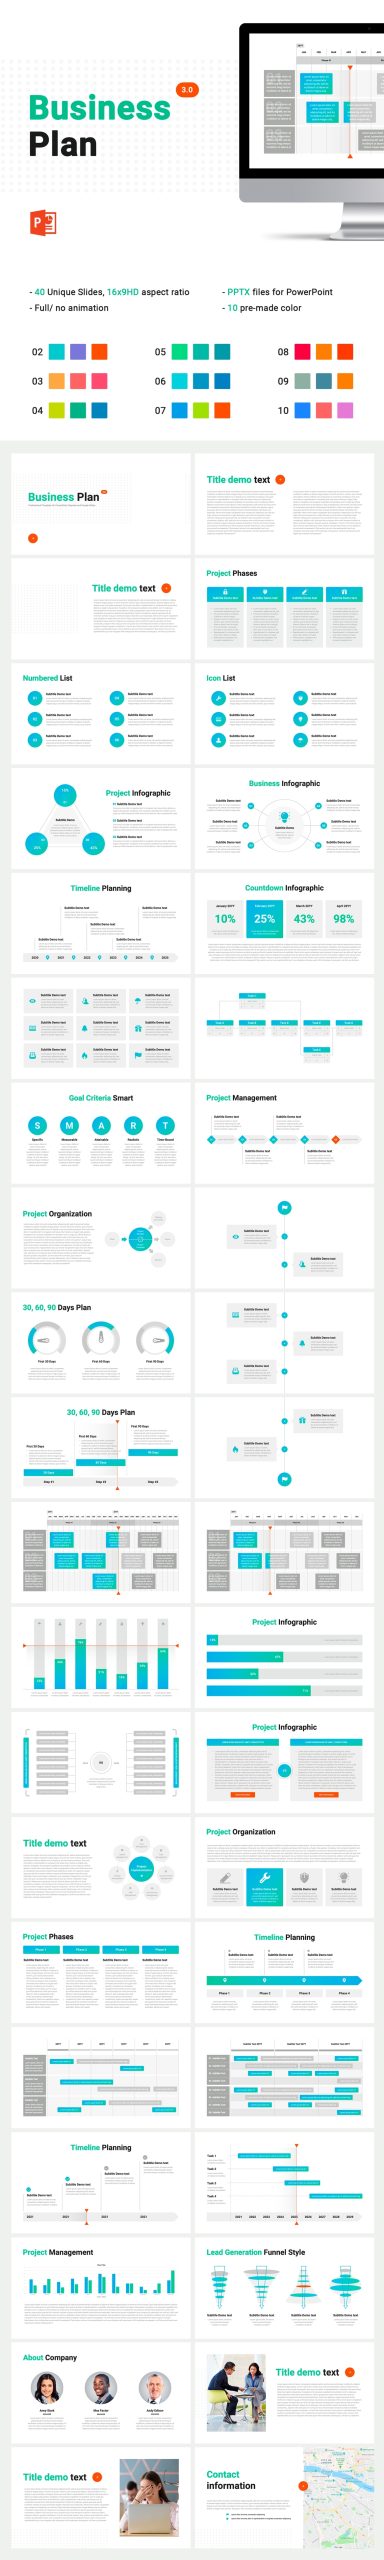 Business Plan Powerpoint Template - Download Now! With Regard To Business Plan Powerpoint Template Free Download